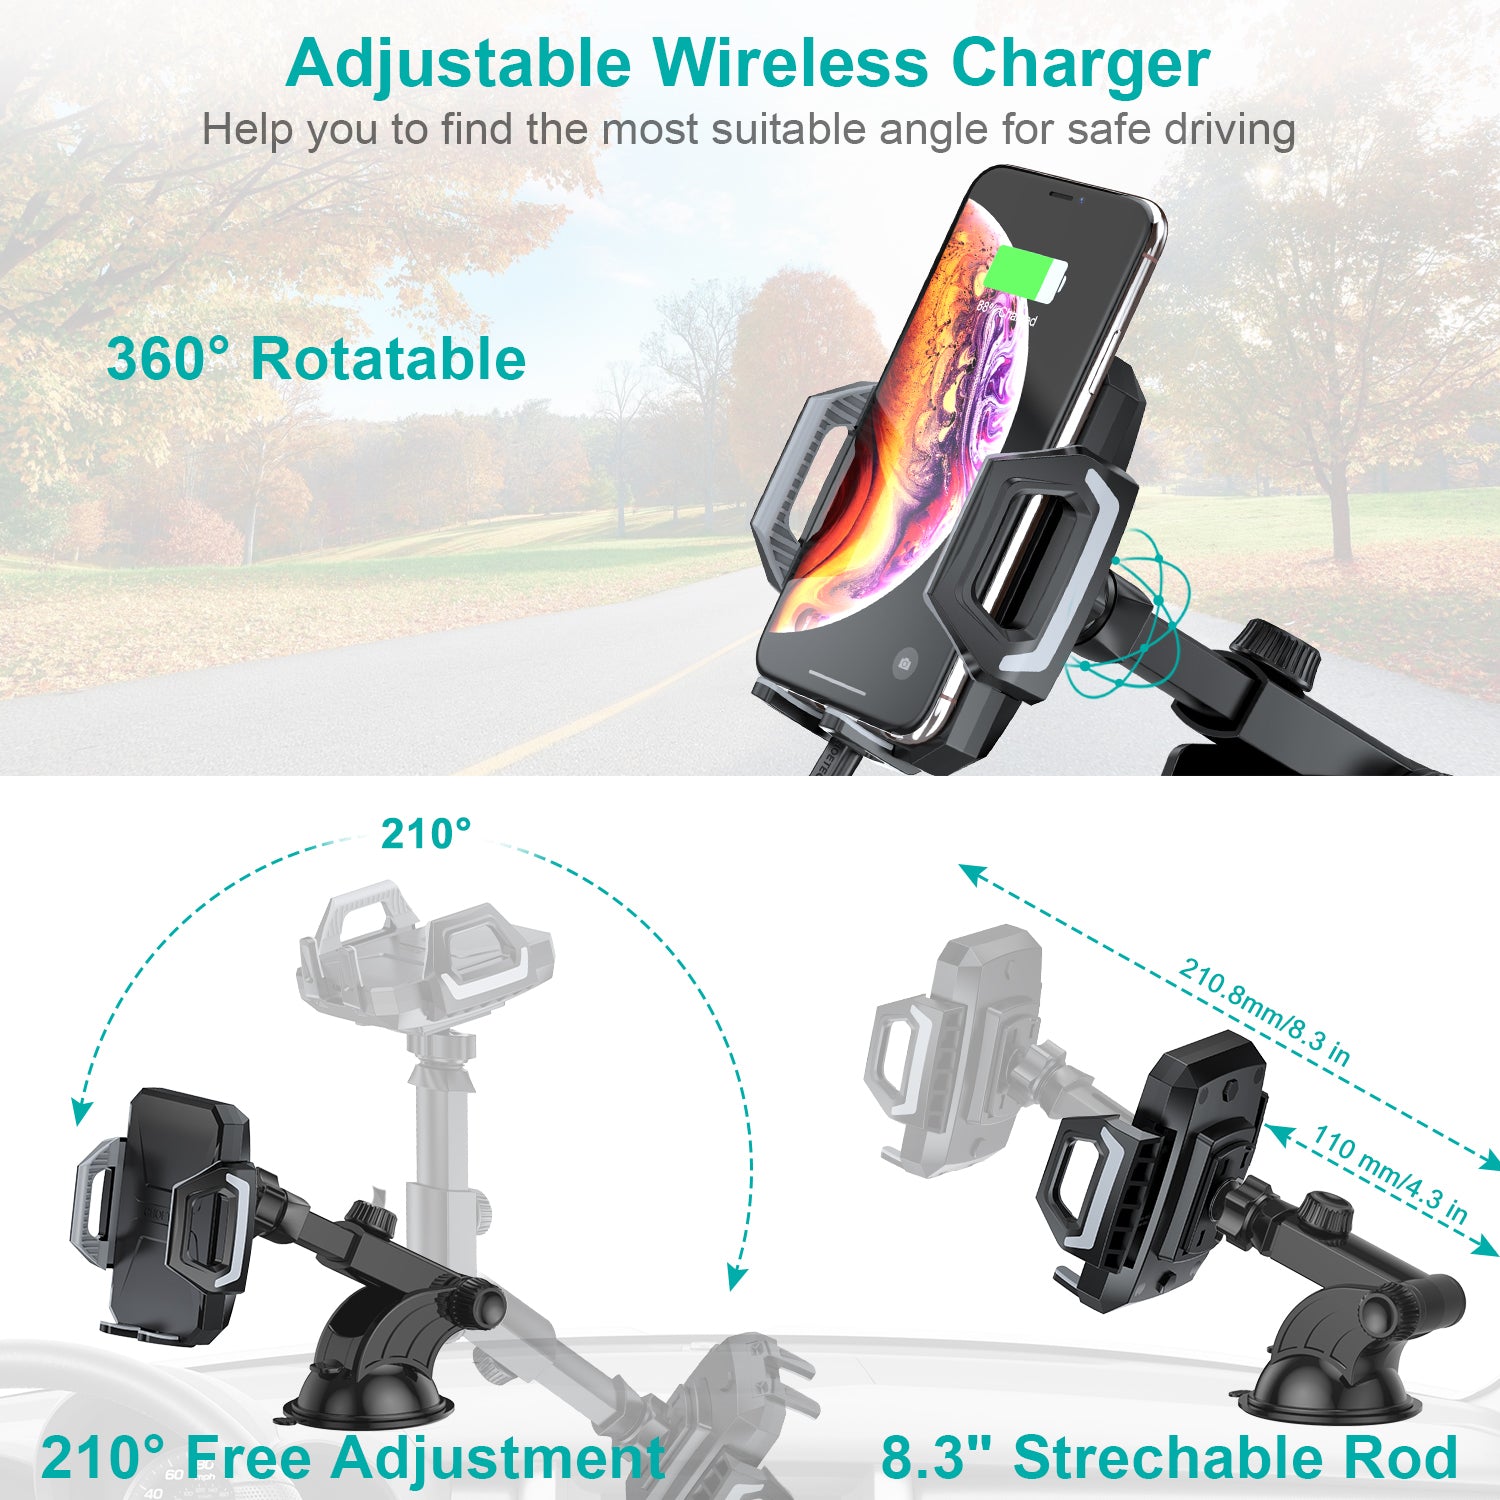 T521-S Choetech 10W Qi Wireless Car Charging Stand